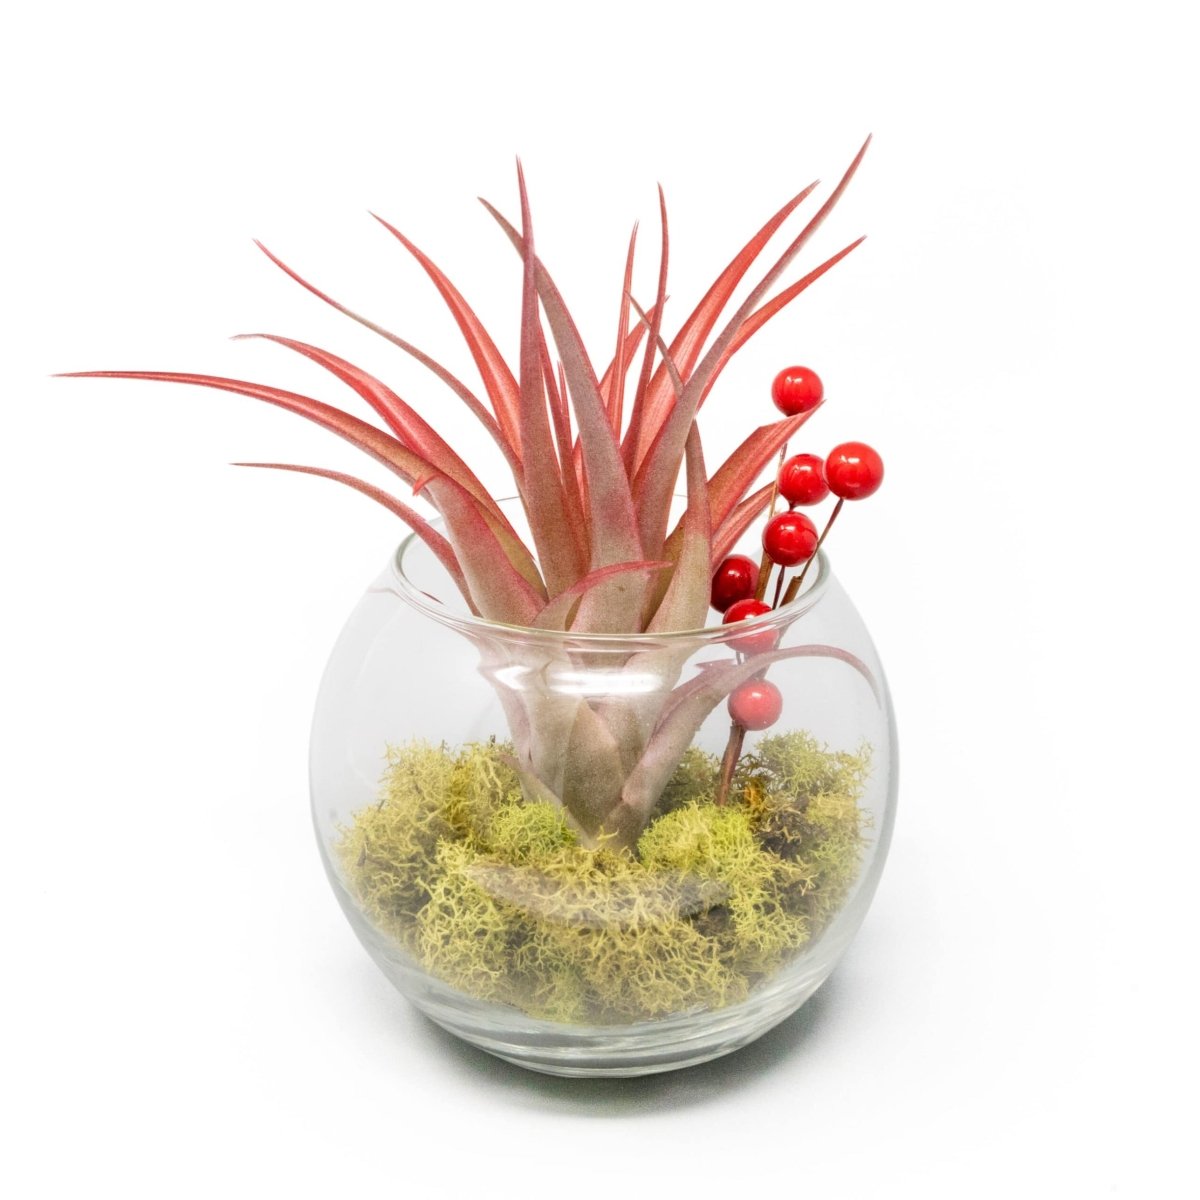 Air Plant Supply Co. Festive Terrarium with Green Reindeer Moss, Berry Sprig, & Tillandsia Red Abdita Air Plant - lily & onyx